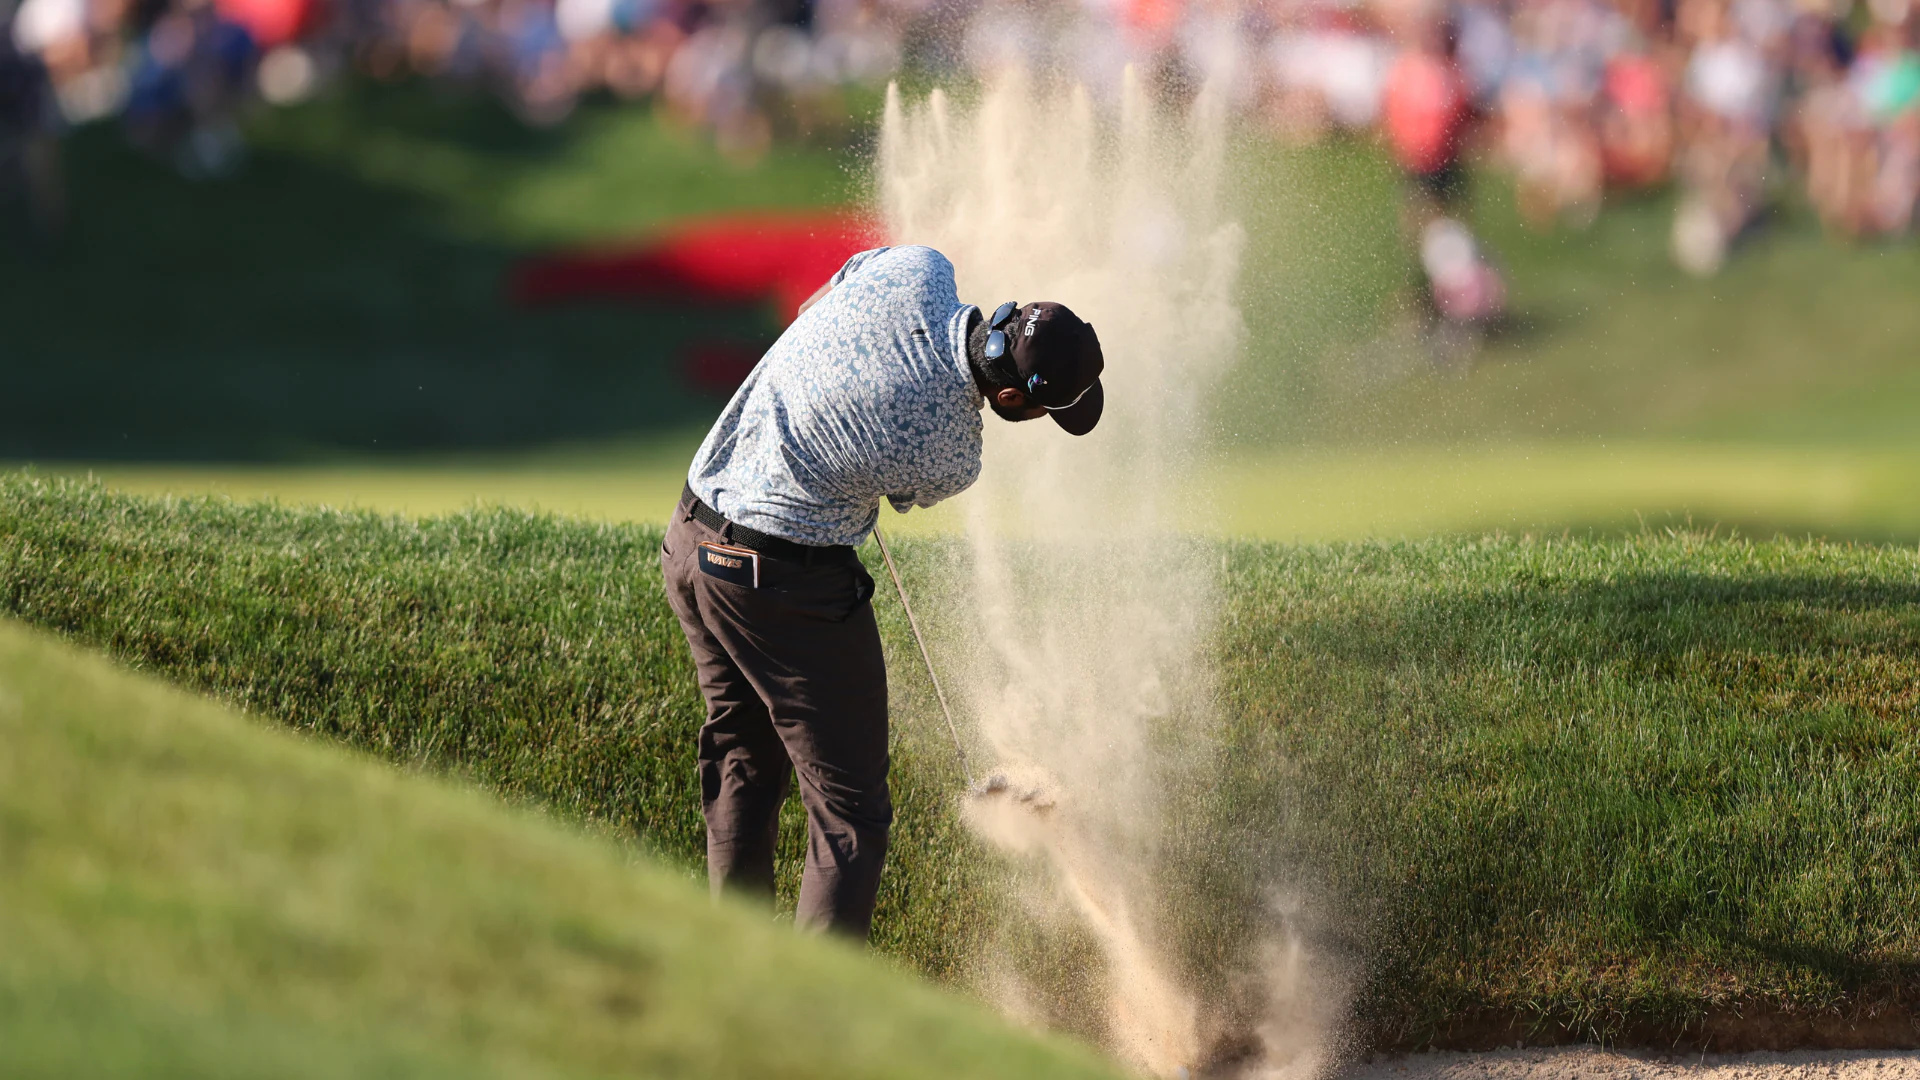 Bunker blade on No. 18 by Sahith Theegala crushes victory hopes at Travelers Championship